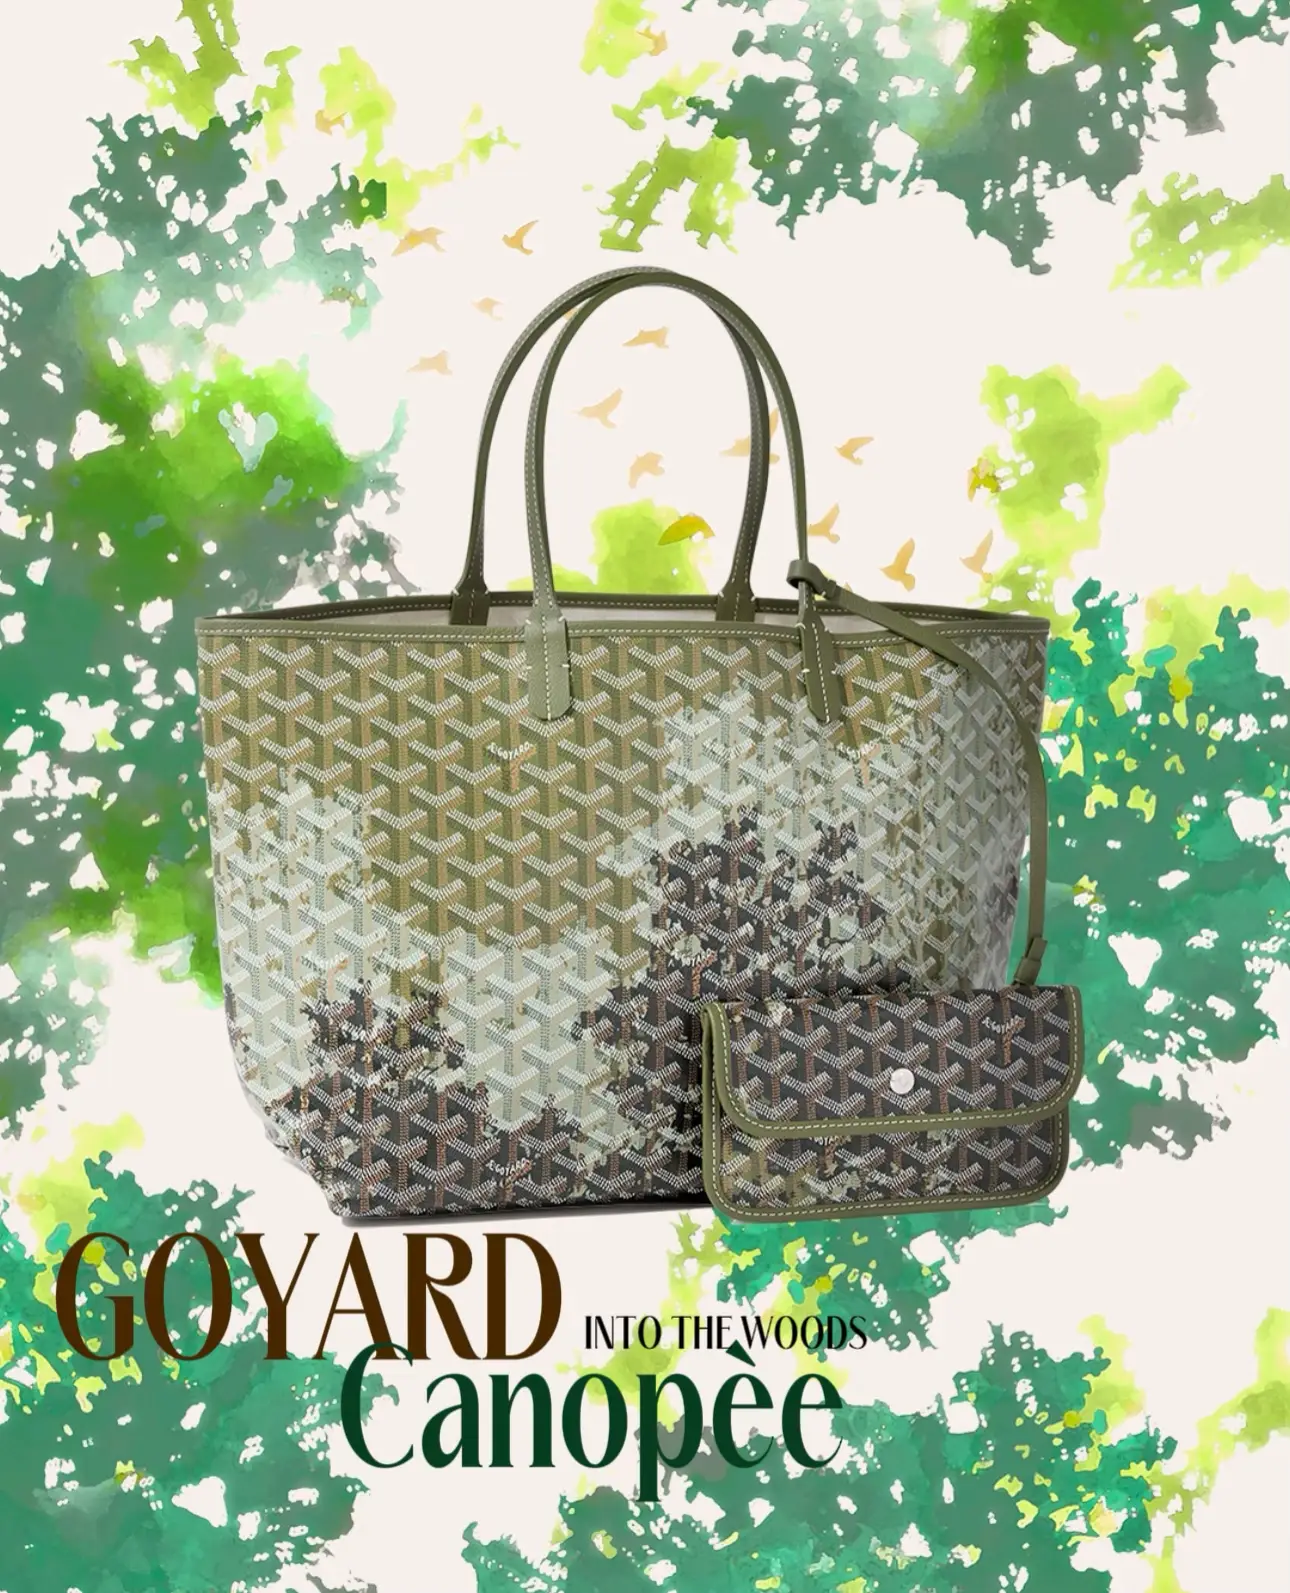 I've fallen in love with this baby blue color Goyard but I can't